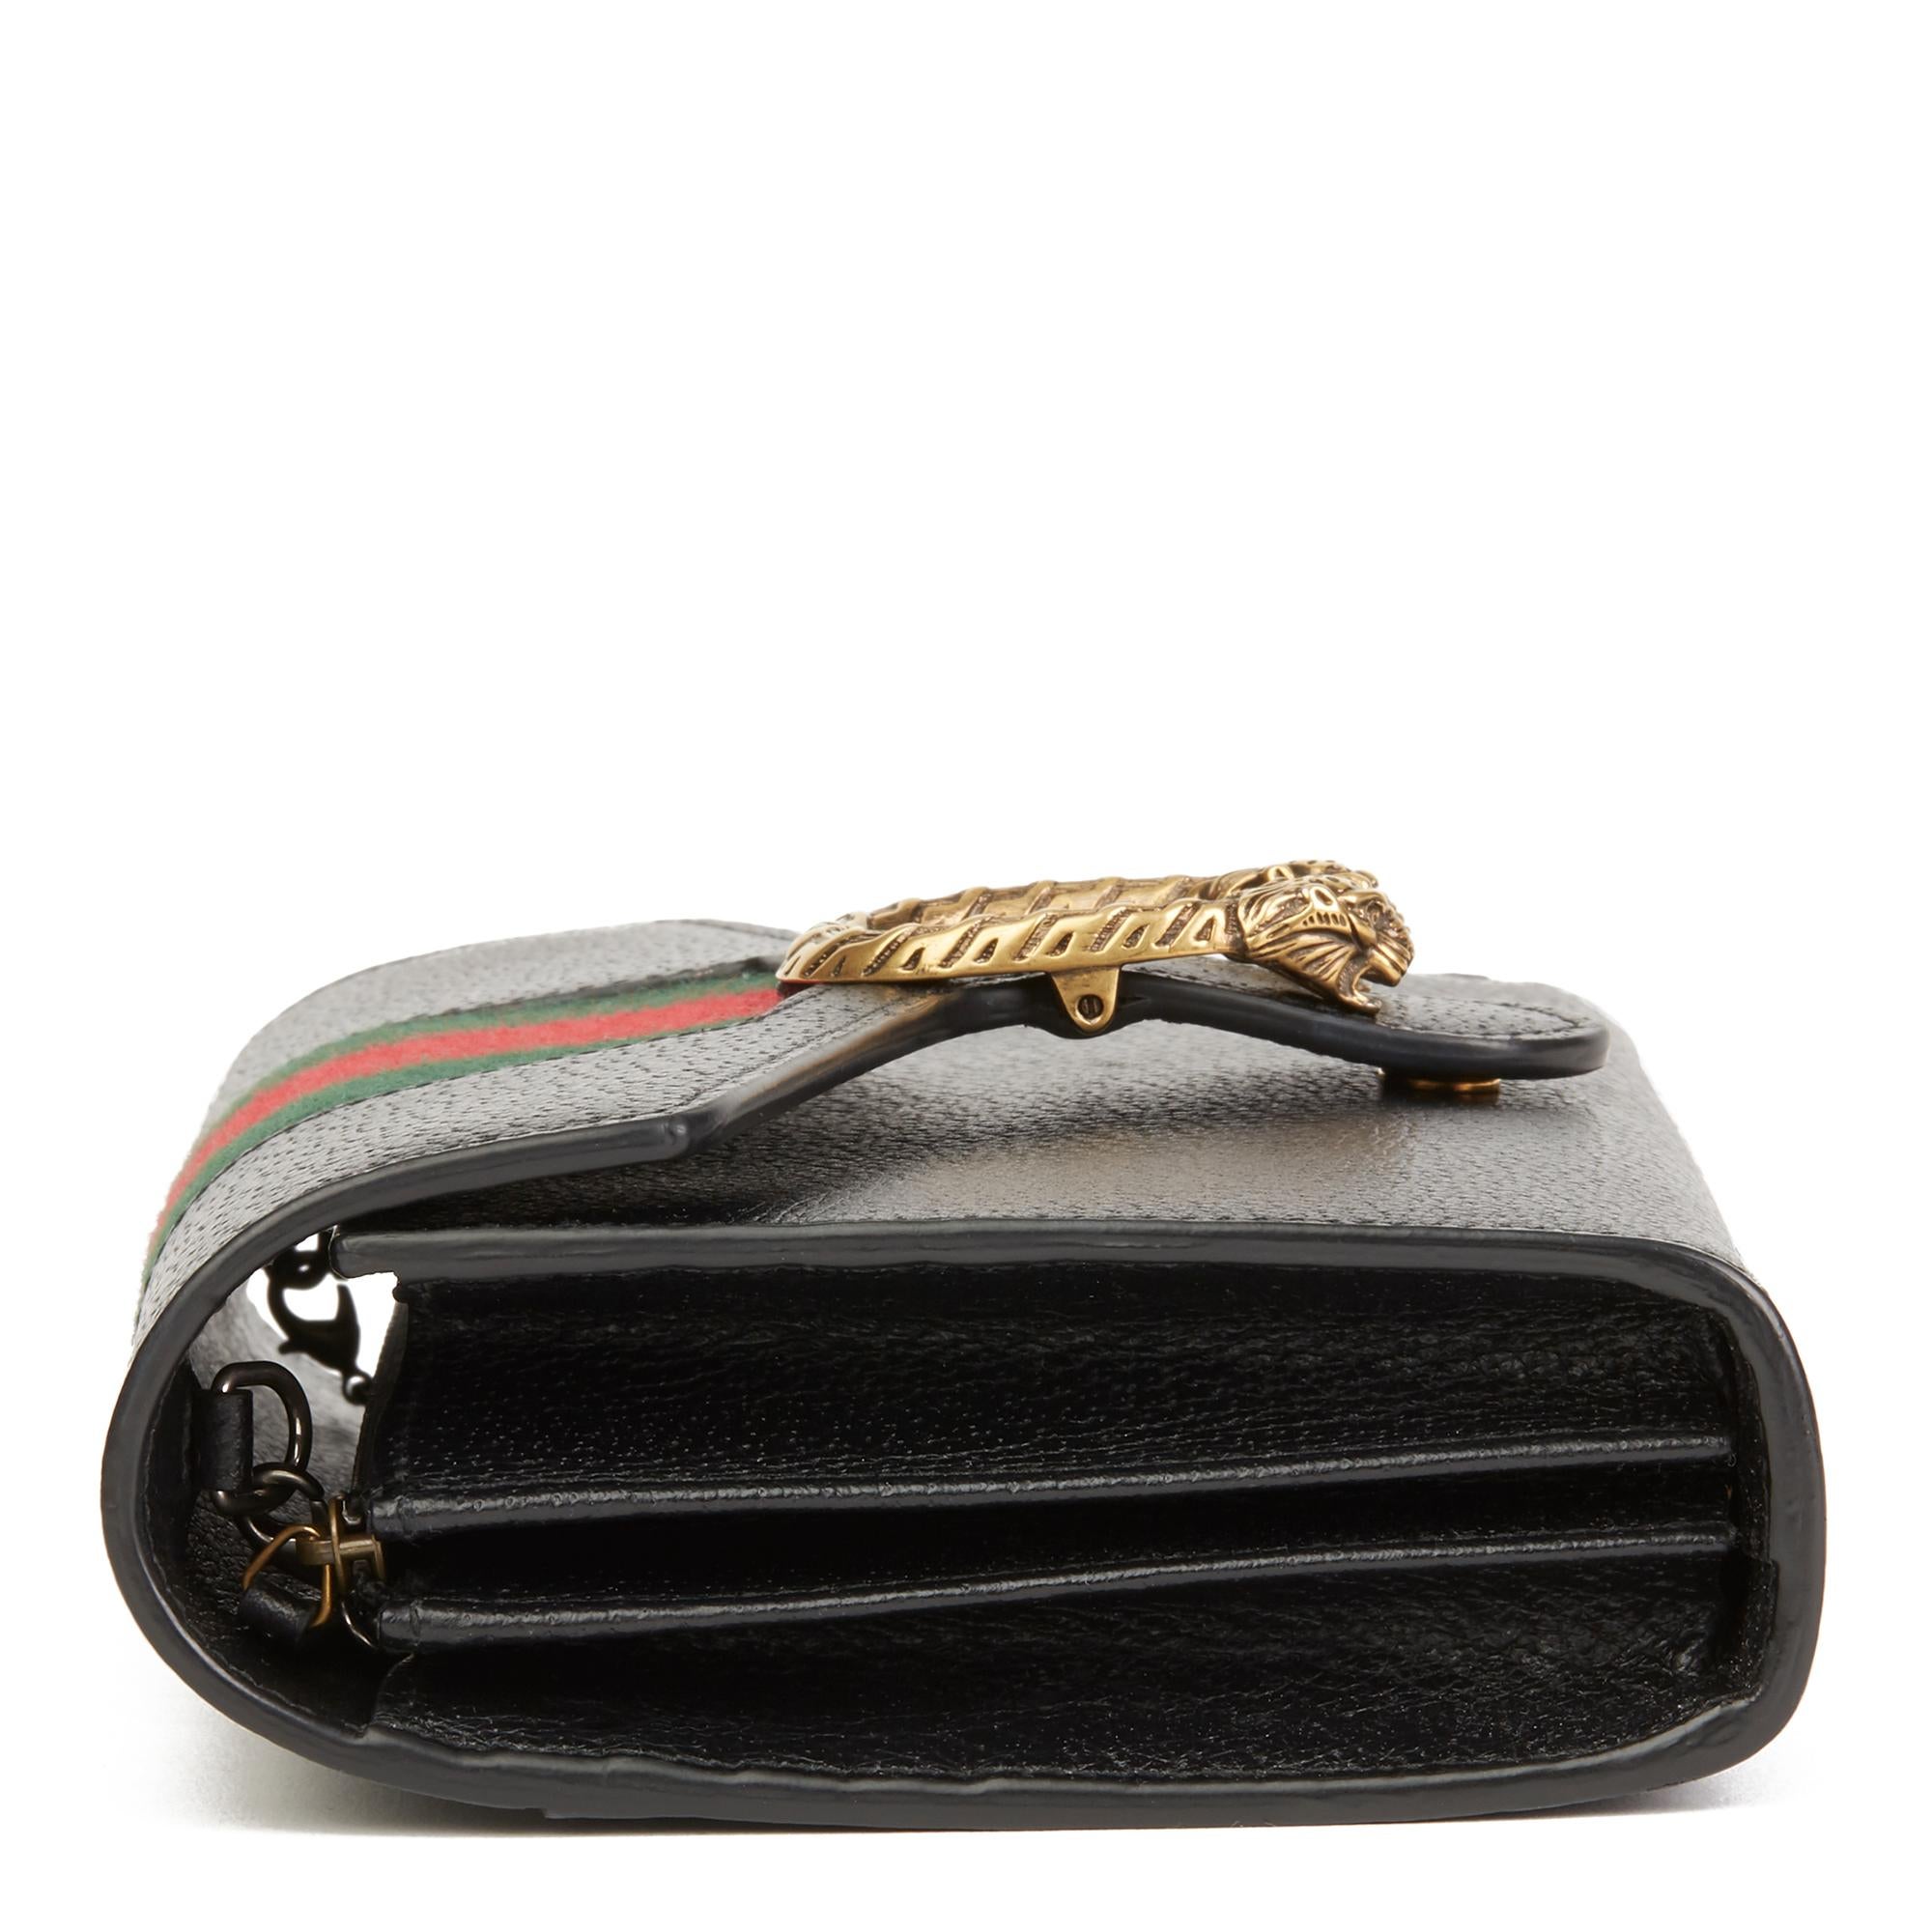 GUCCI
Black Calfskin Leather Web Mini Dionysus Wallet on Chain

 Reference: HB2799
Serial Number: 481377-0416
Age (Circa): 2016
Accompanied By: Gucci Dust Bag
Authenticity Details: Serial Stamp (Made in Italy)
Gender: Ladies
Type: Shoulder,